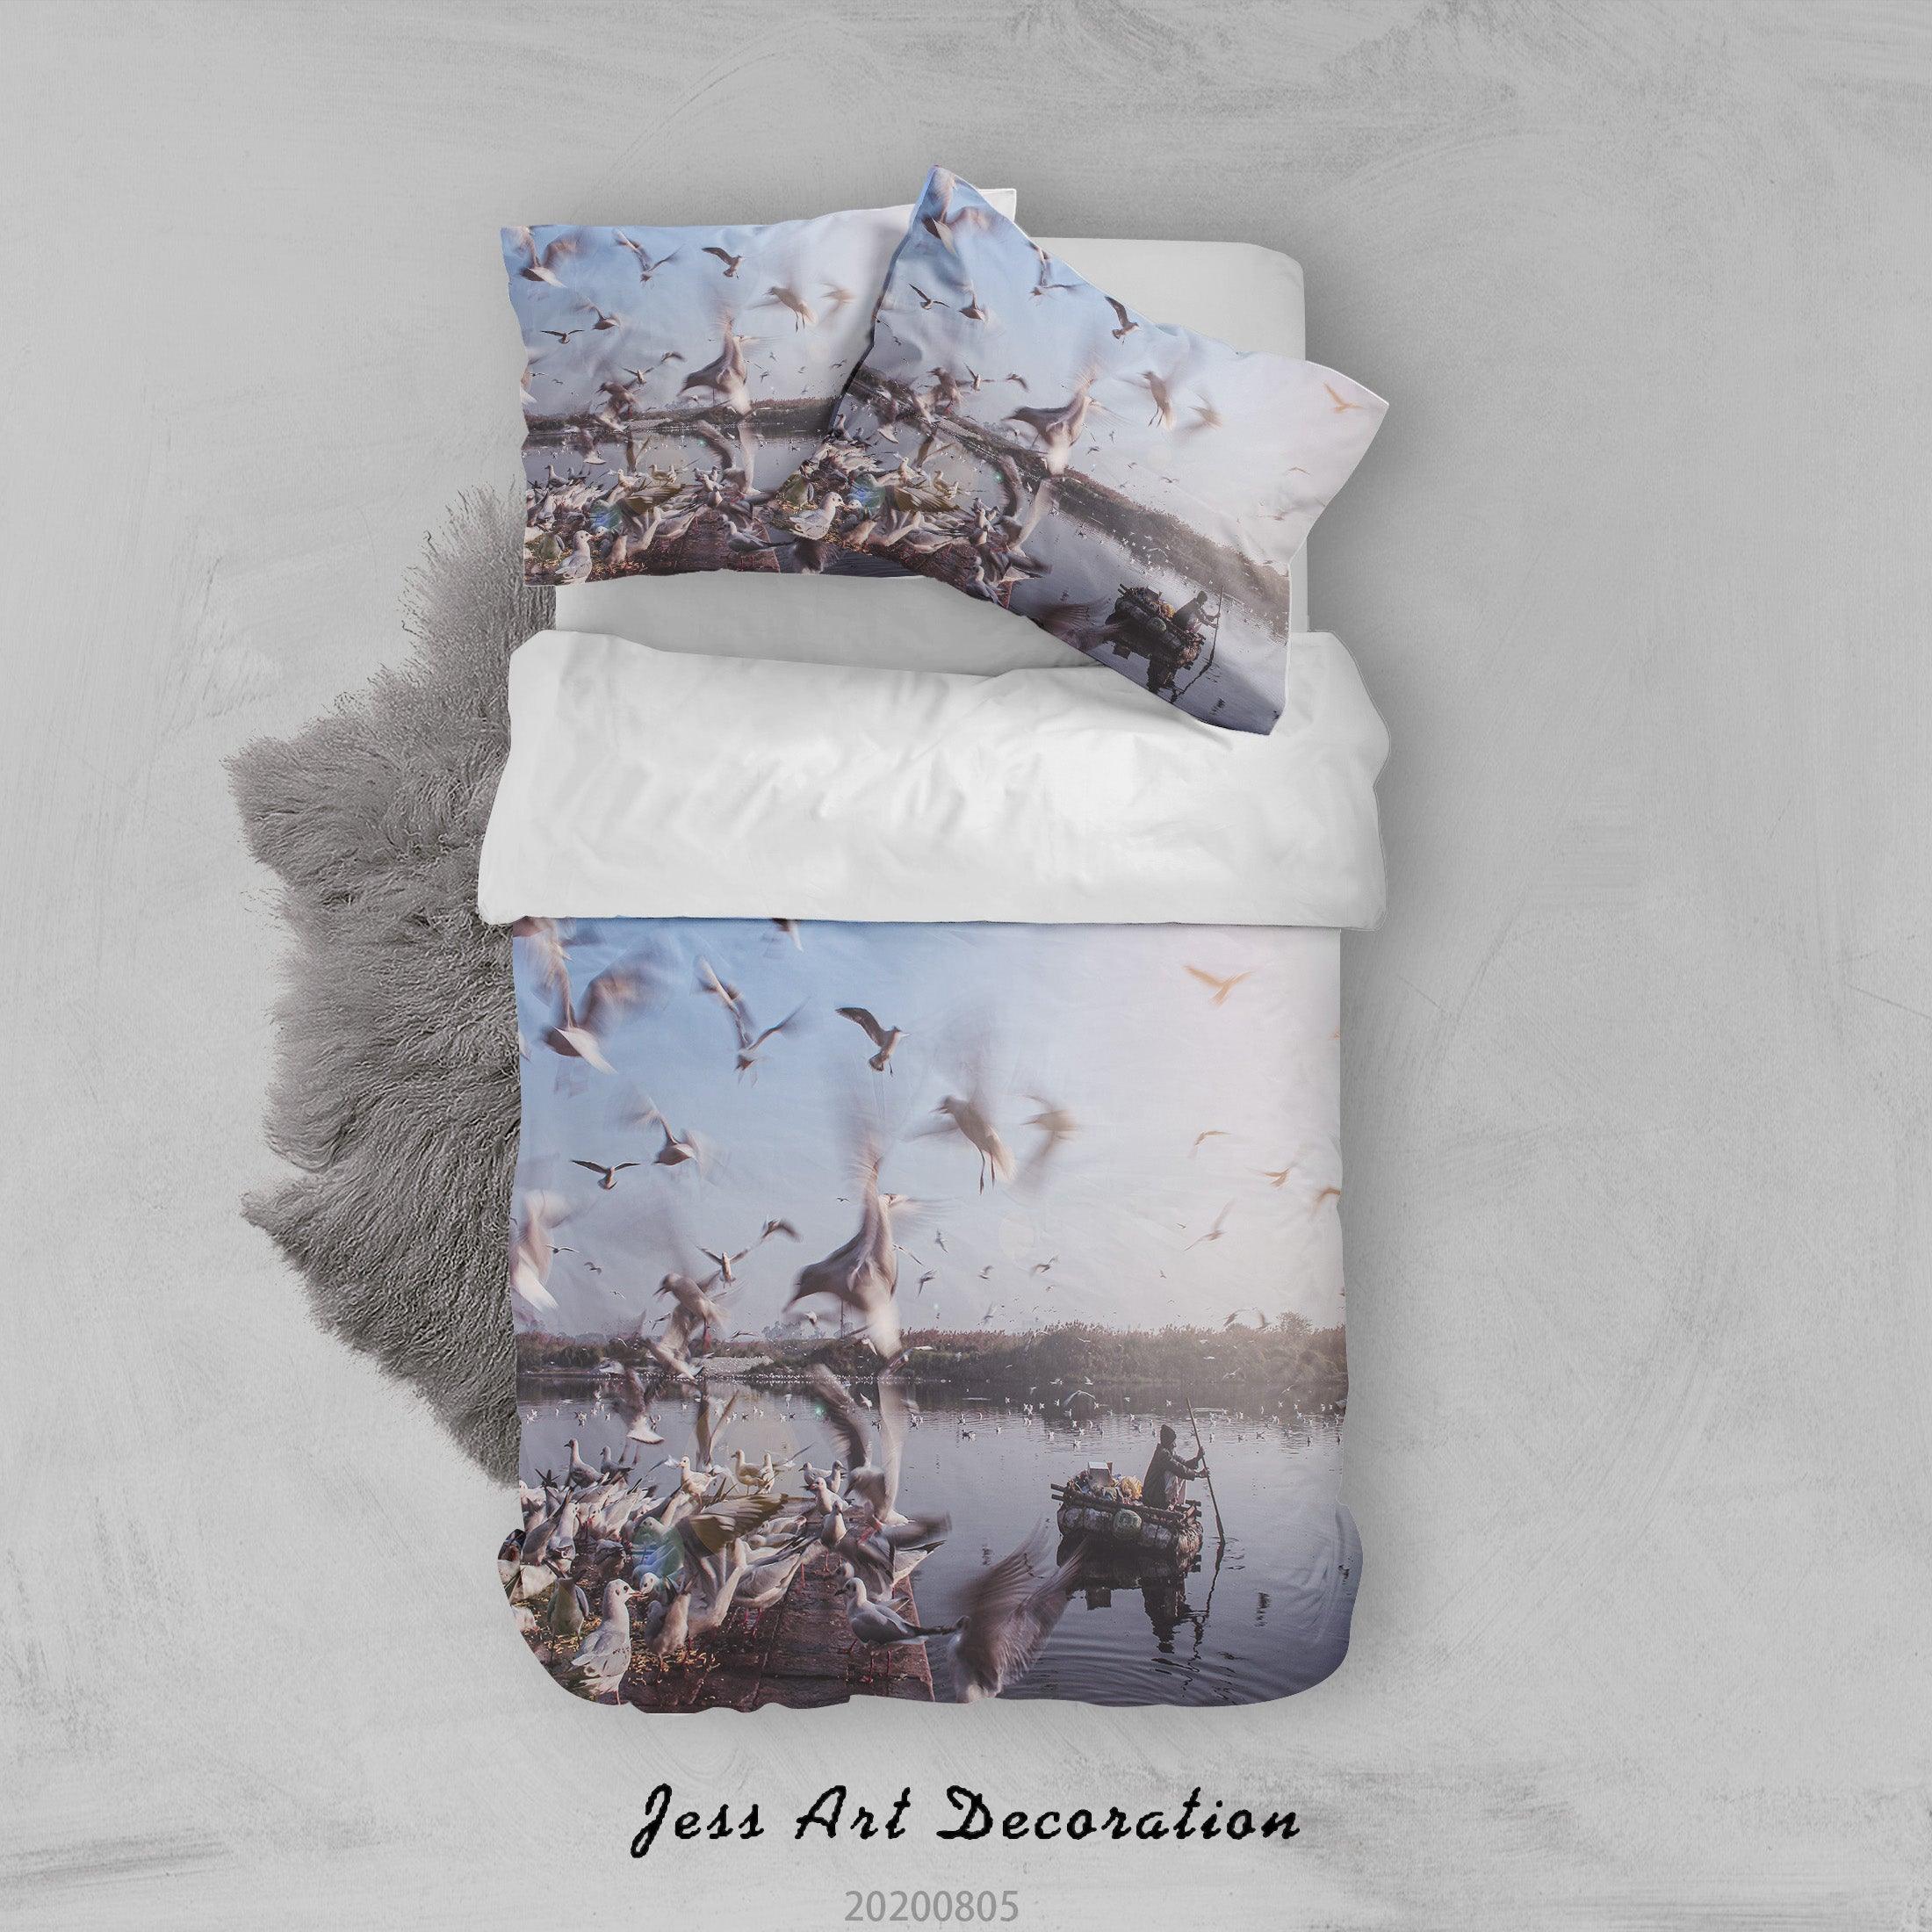 3D Seagull Crowd Boating Scenery Quilt Cover Set Bedding Set Duvet Cover Pillowcases LXL 87- Jess Art Decoration